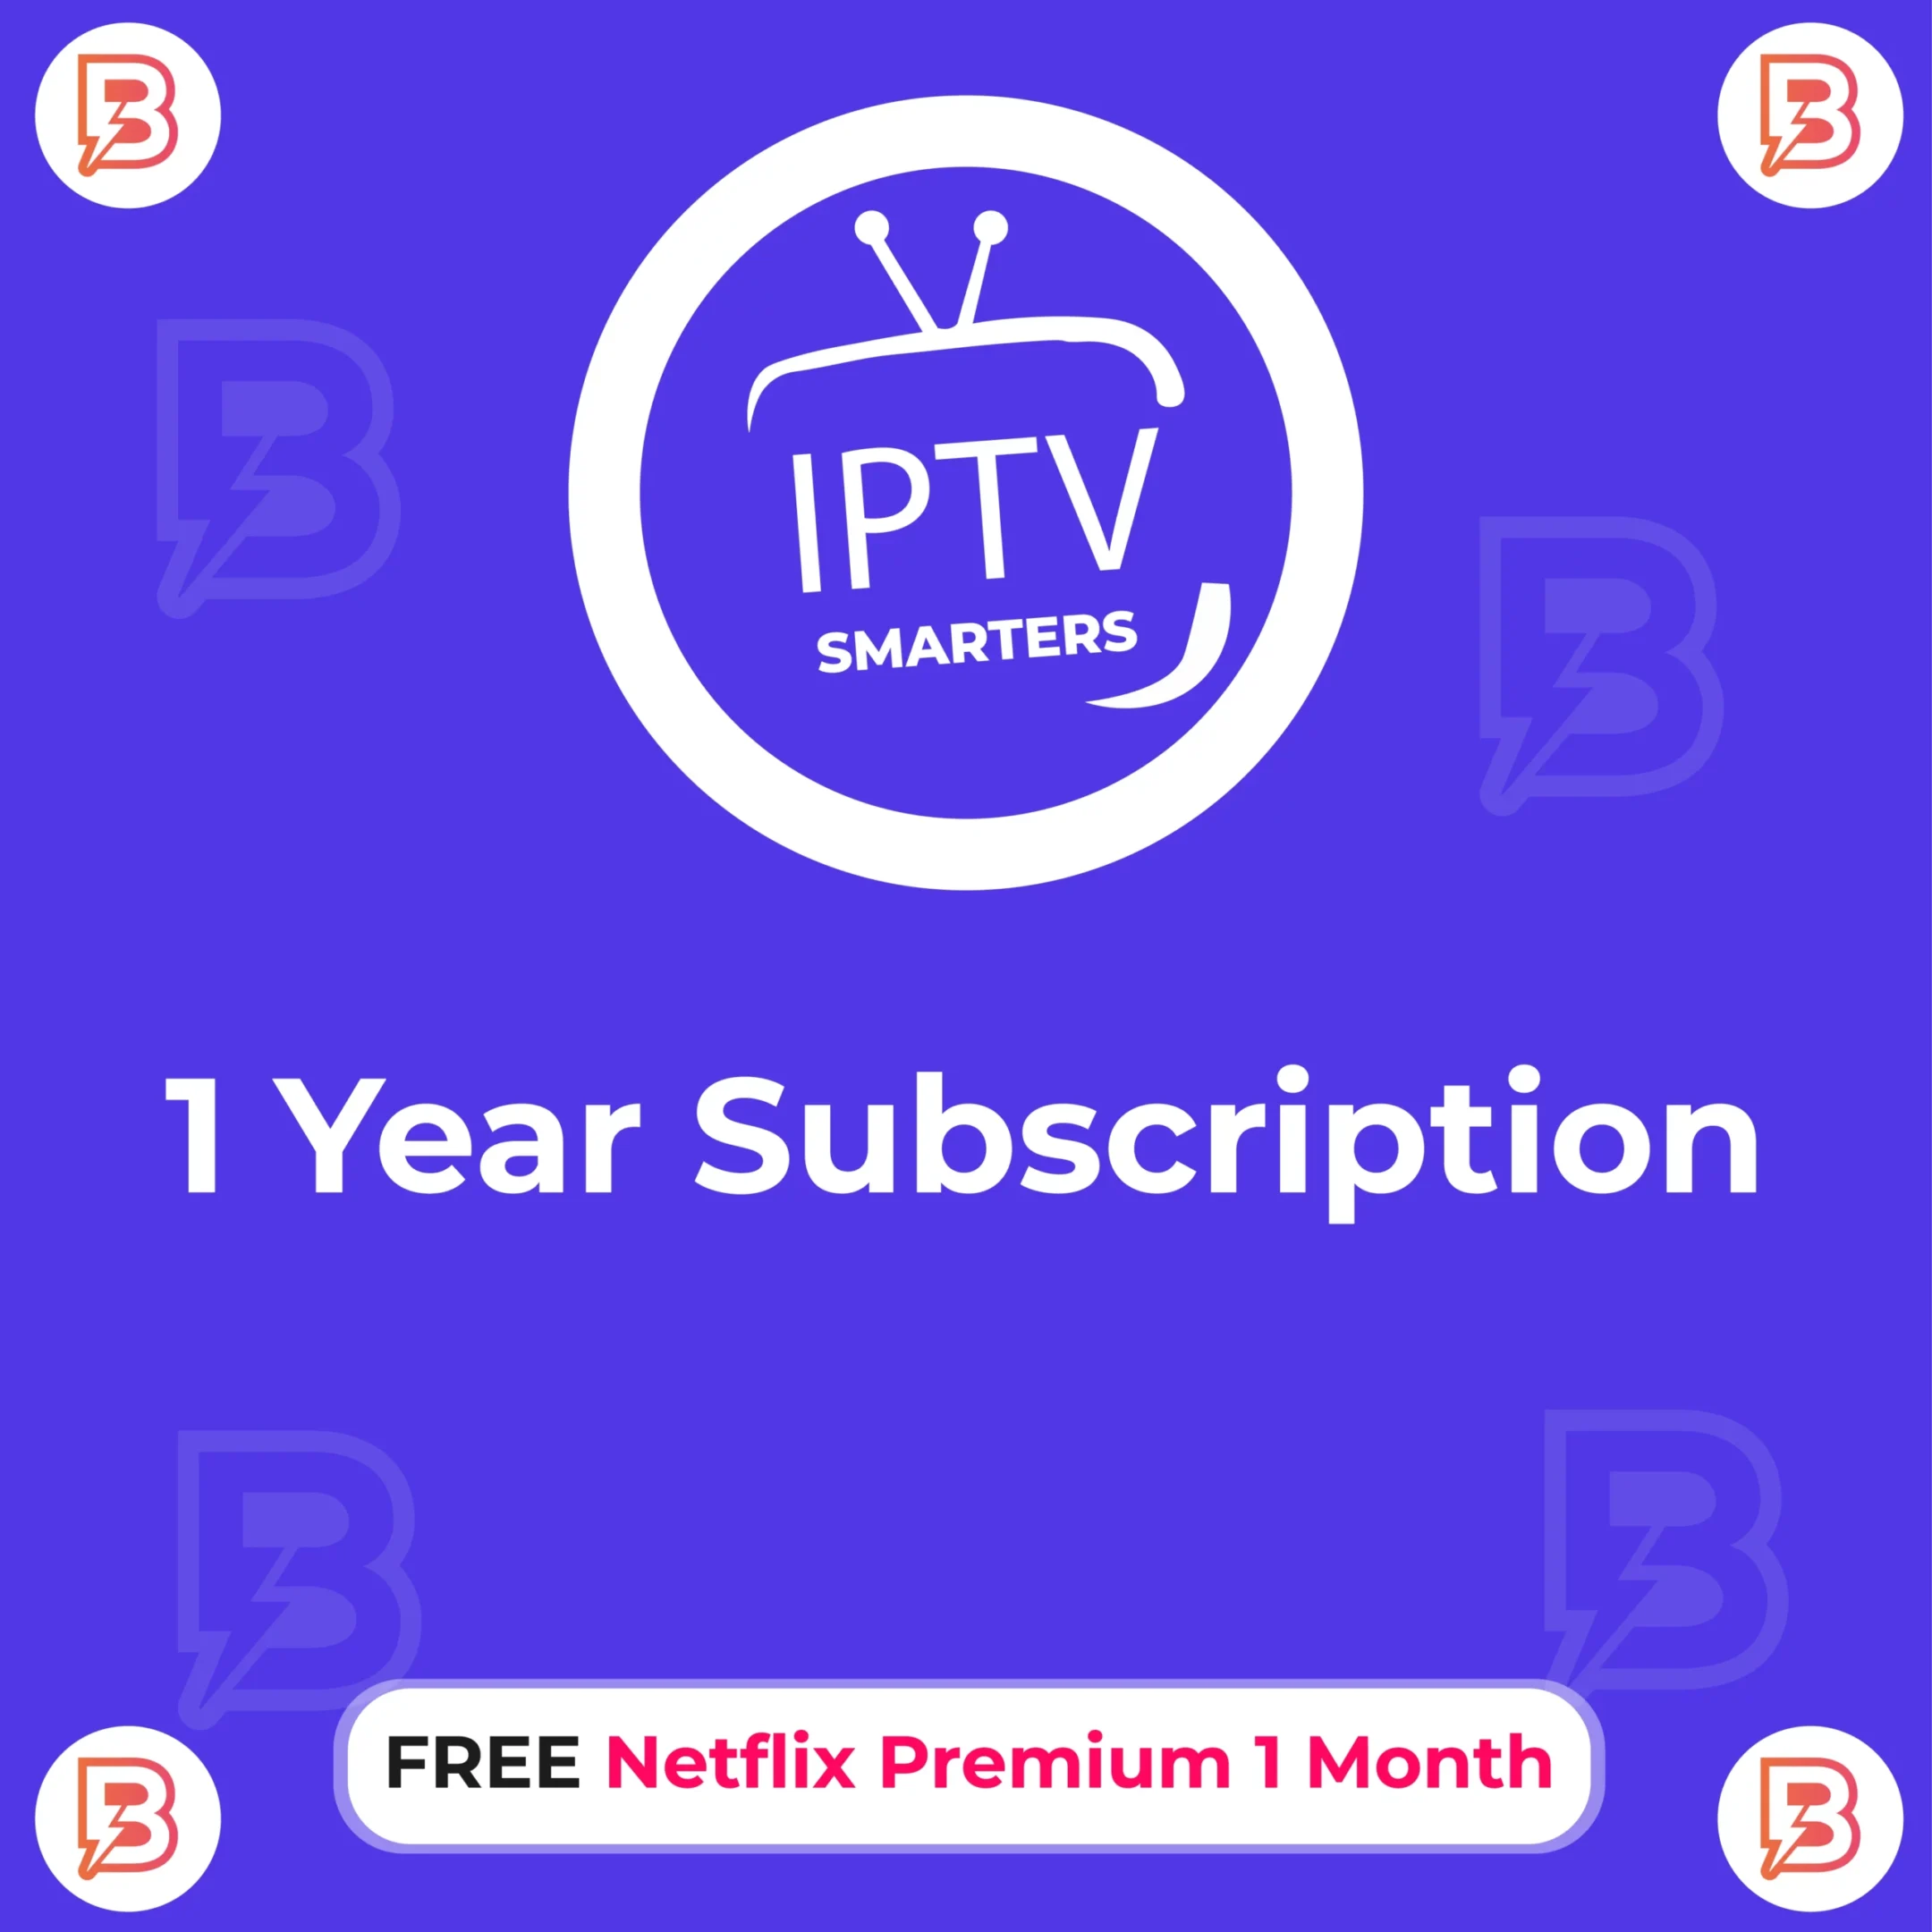 Buy 1 Year Subscriptions